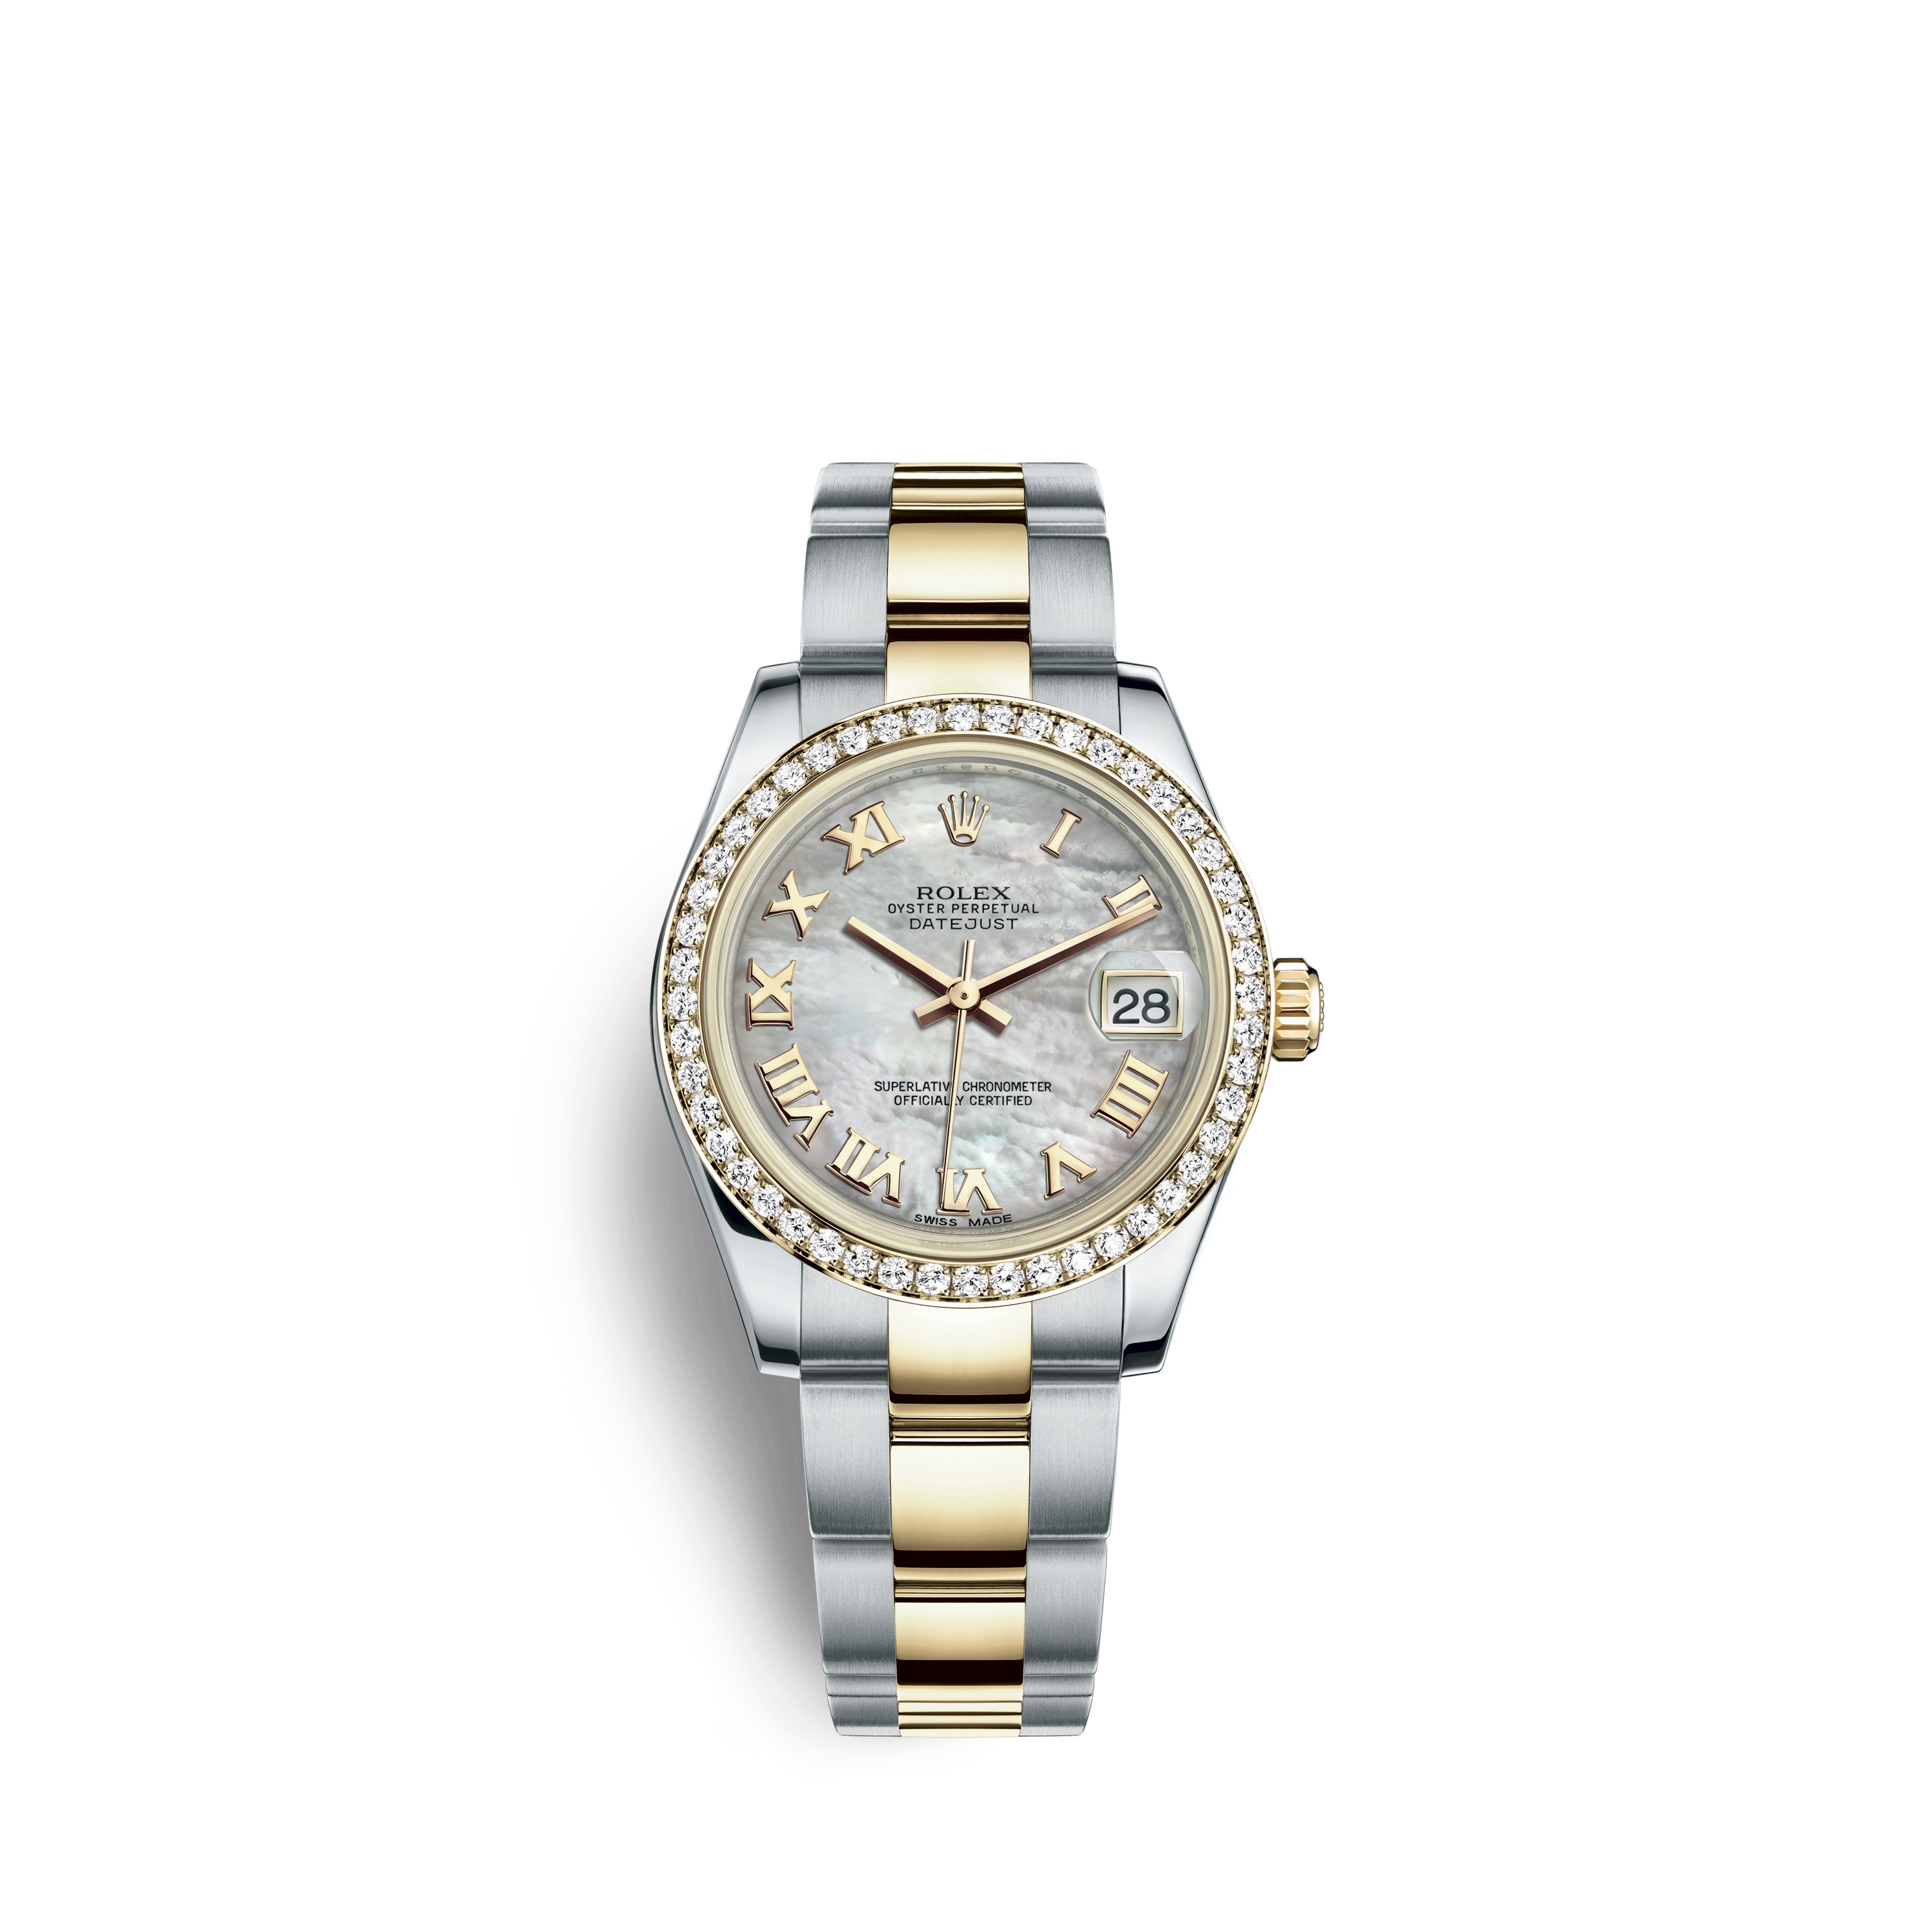 Datejust 31 178383 Gold and Stainless Steel Watch (White Mother-of-Pearl)